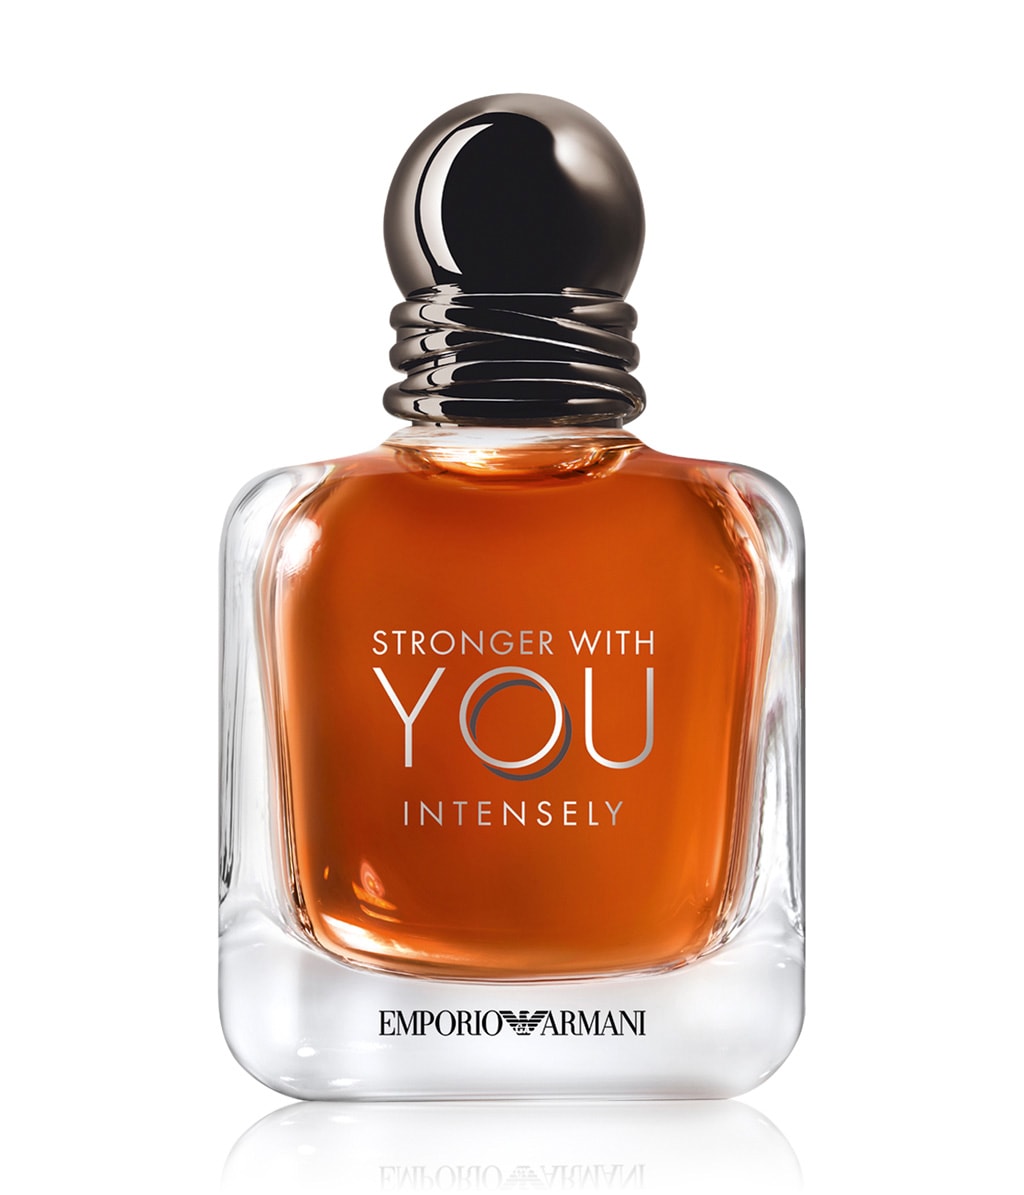 emporio armani stronger with you cologne review